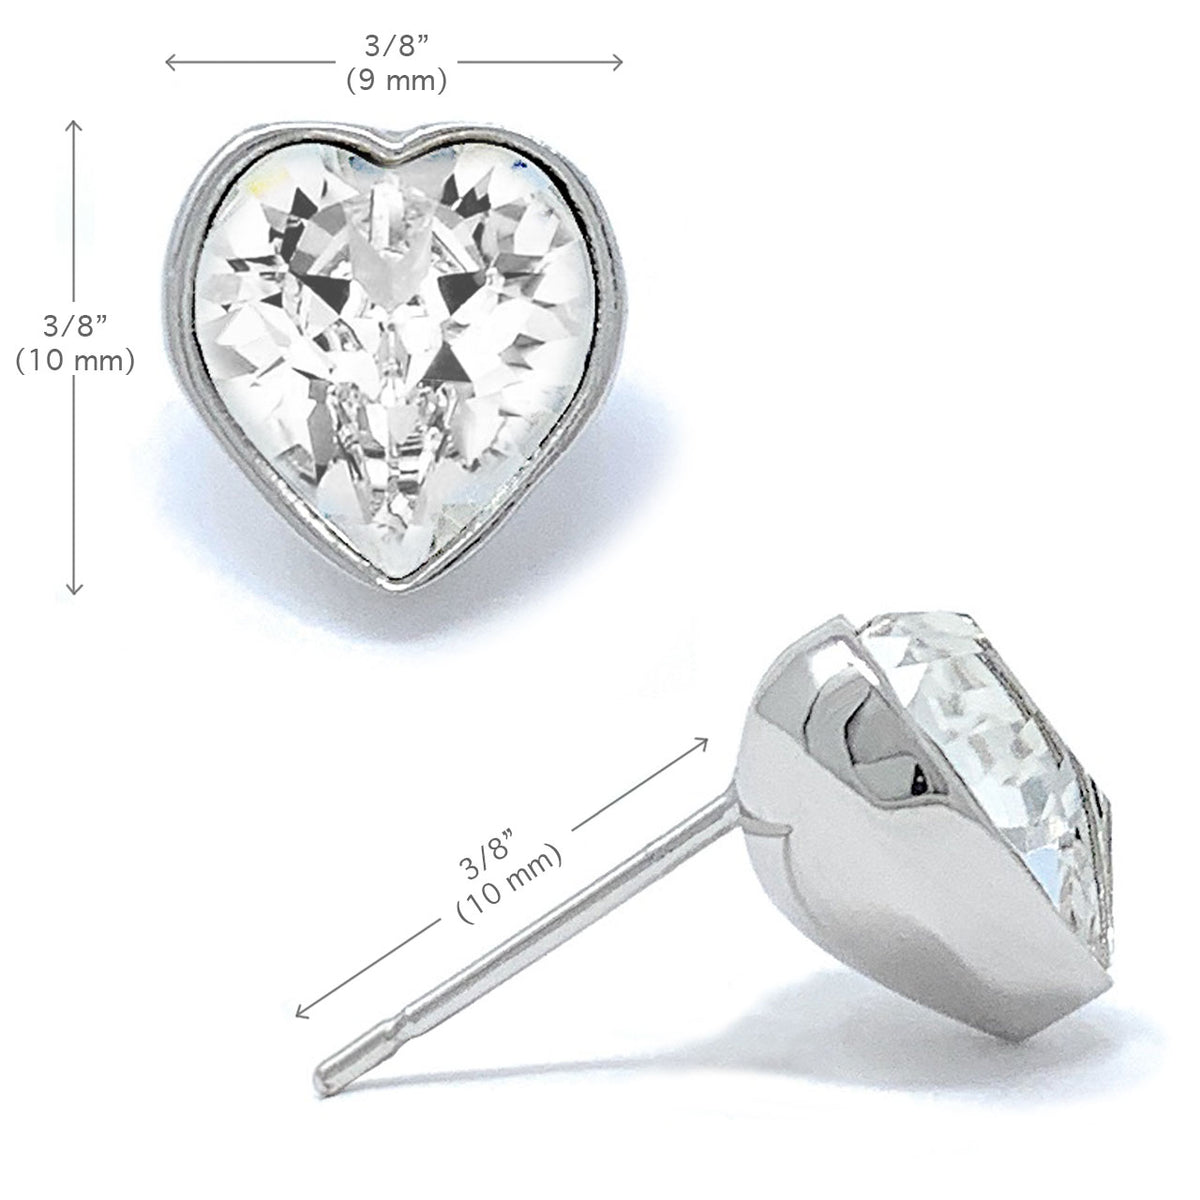 Lucia Stud Earrings with White Clear Heart Crystals from Swarovski Silver Toned Rhodium Plated - Ed Heart